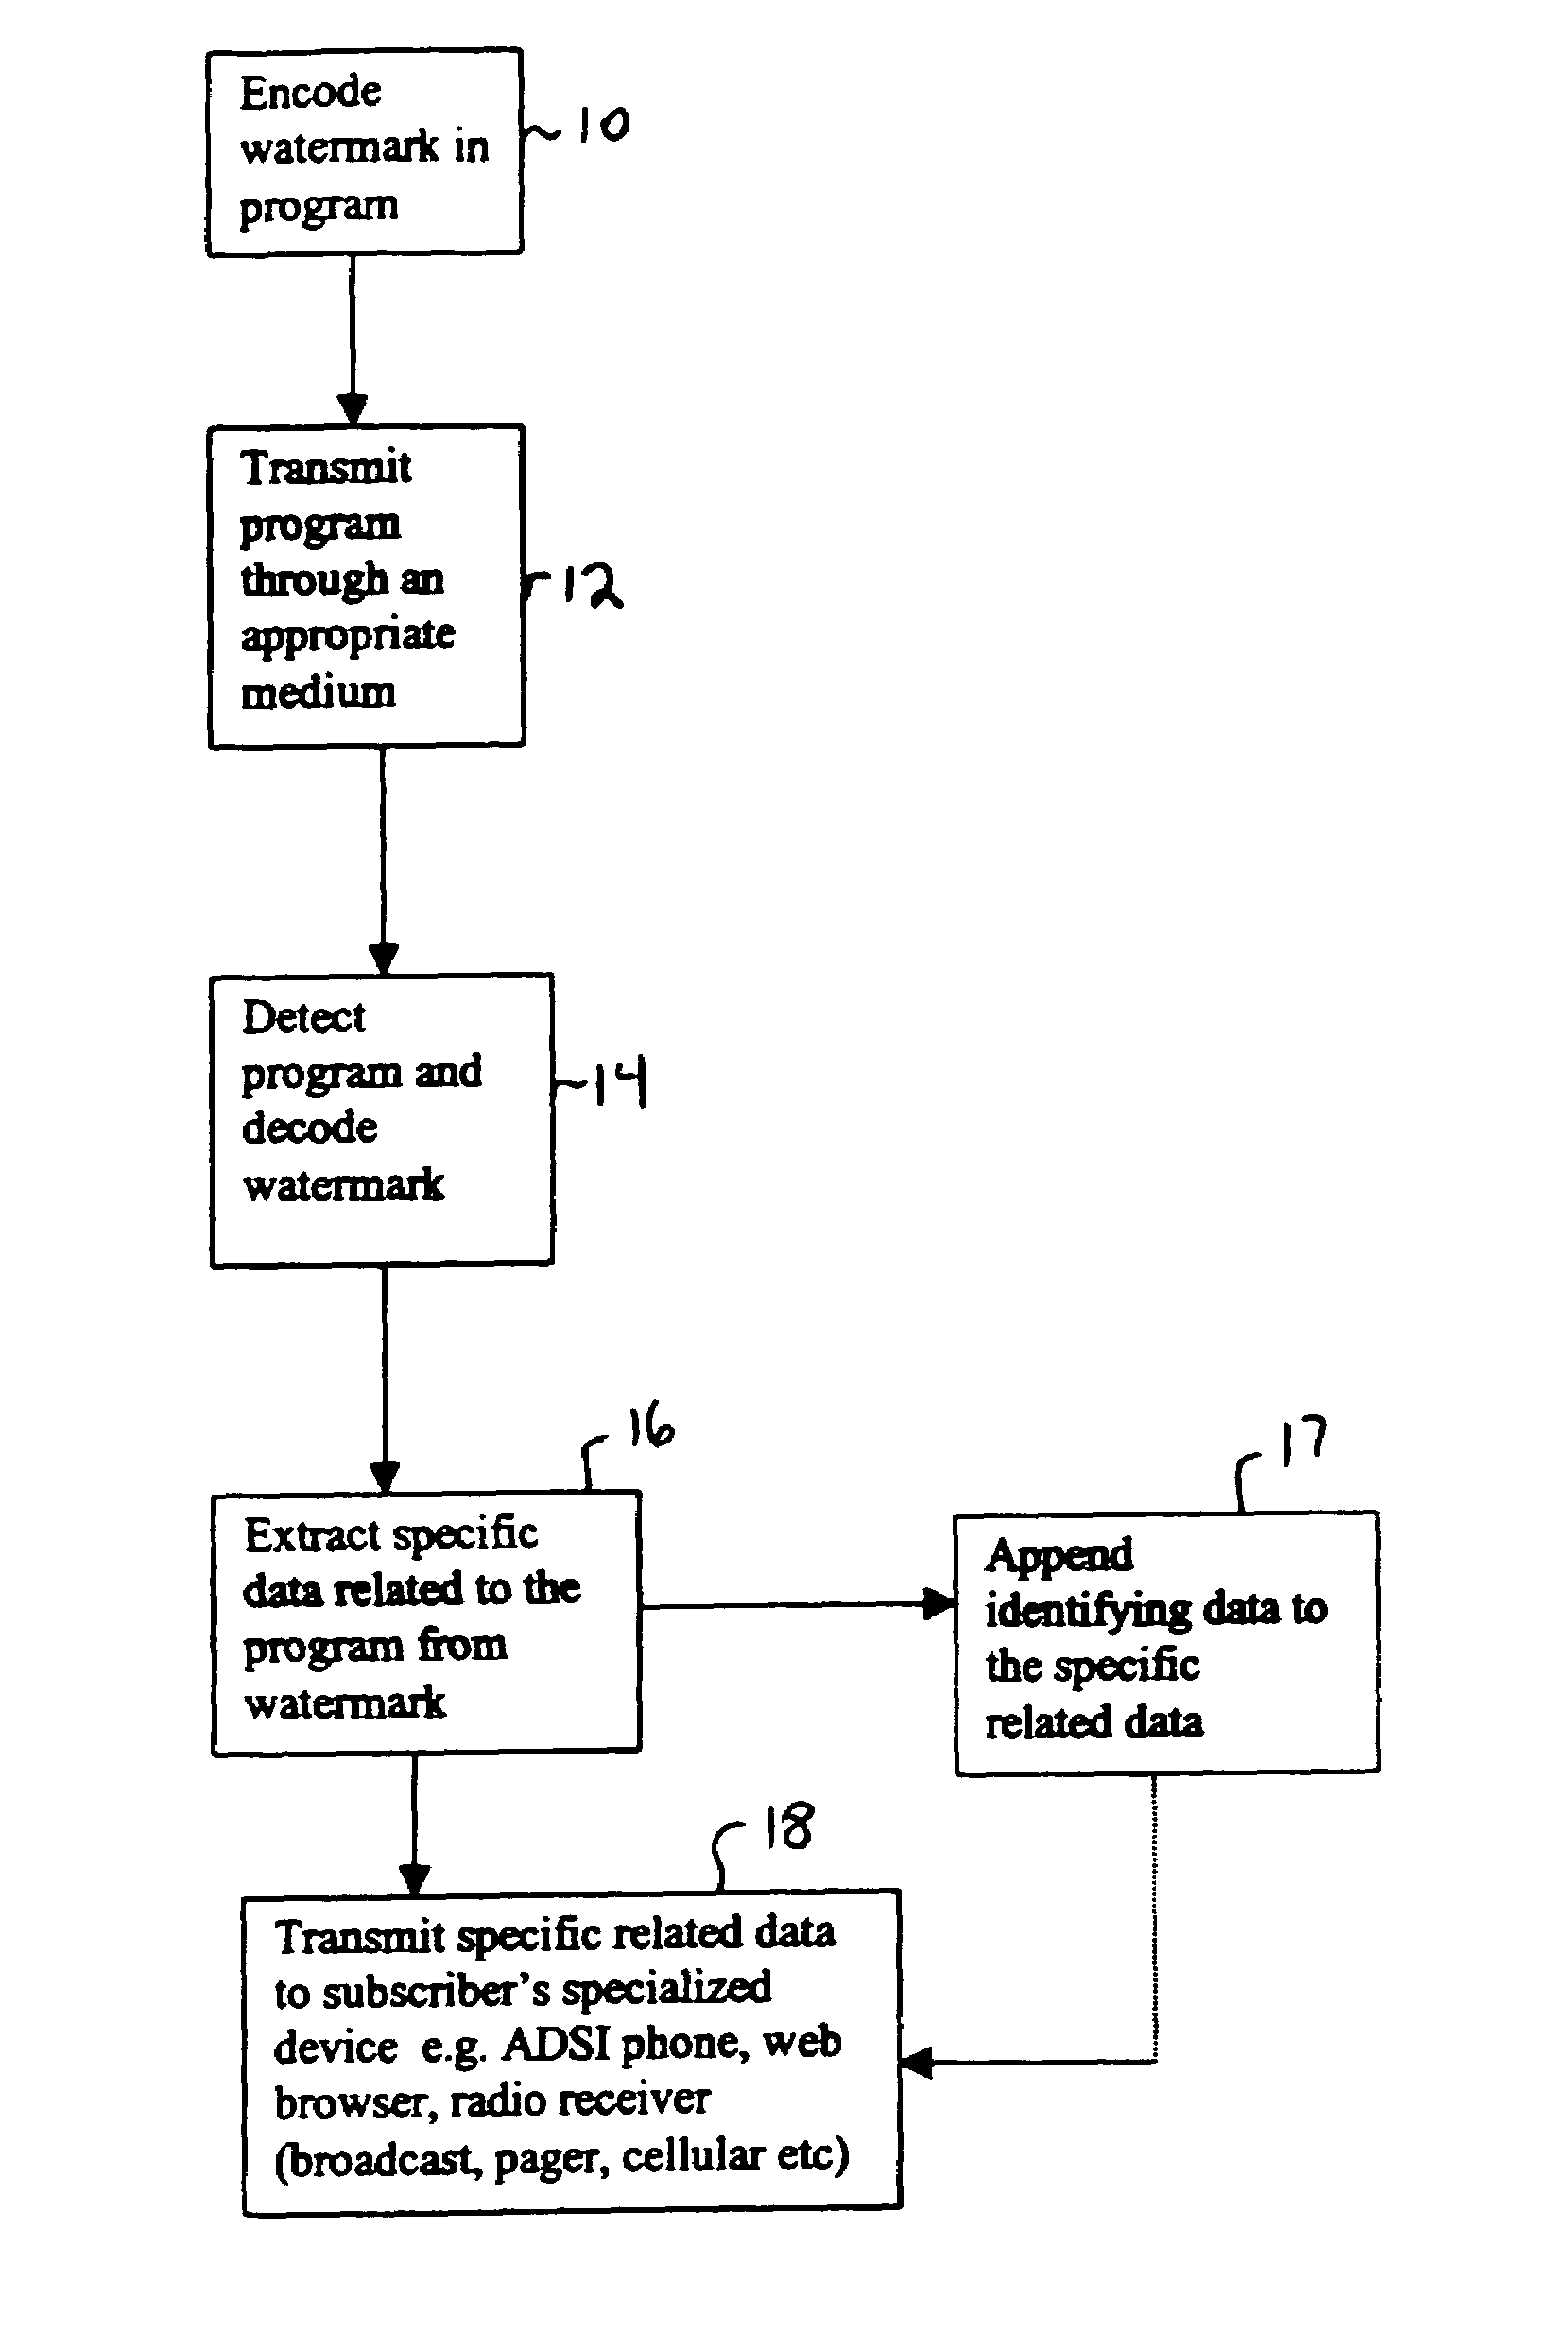 Method and system for capture of location specific media related information and delivery through communications network